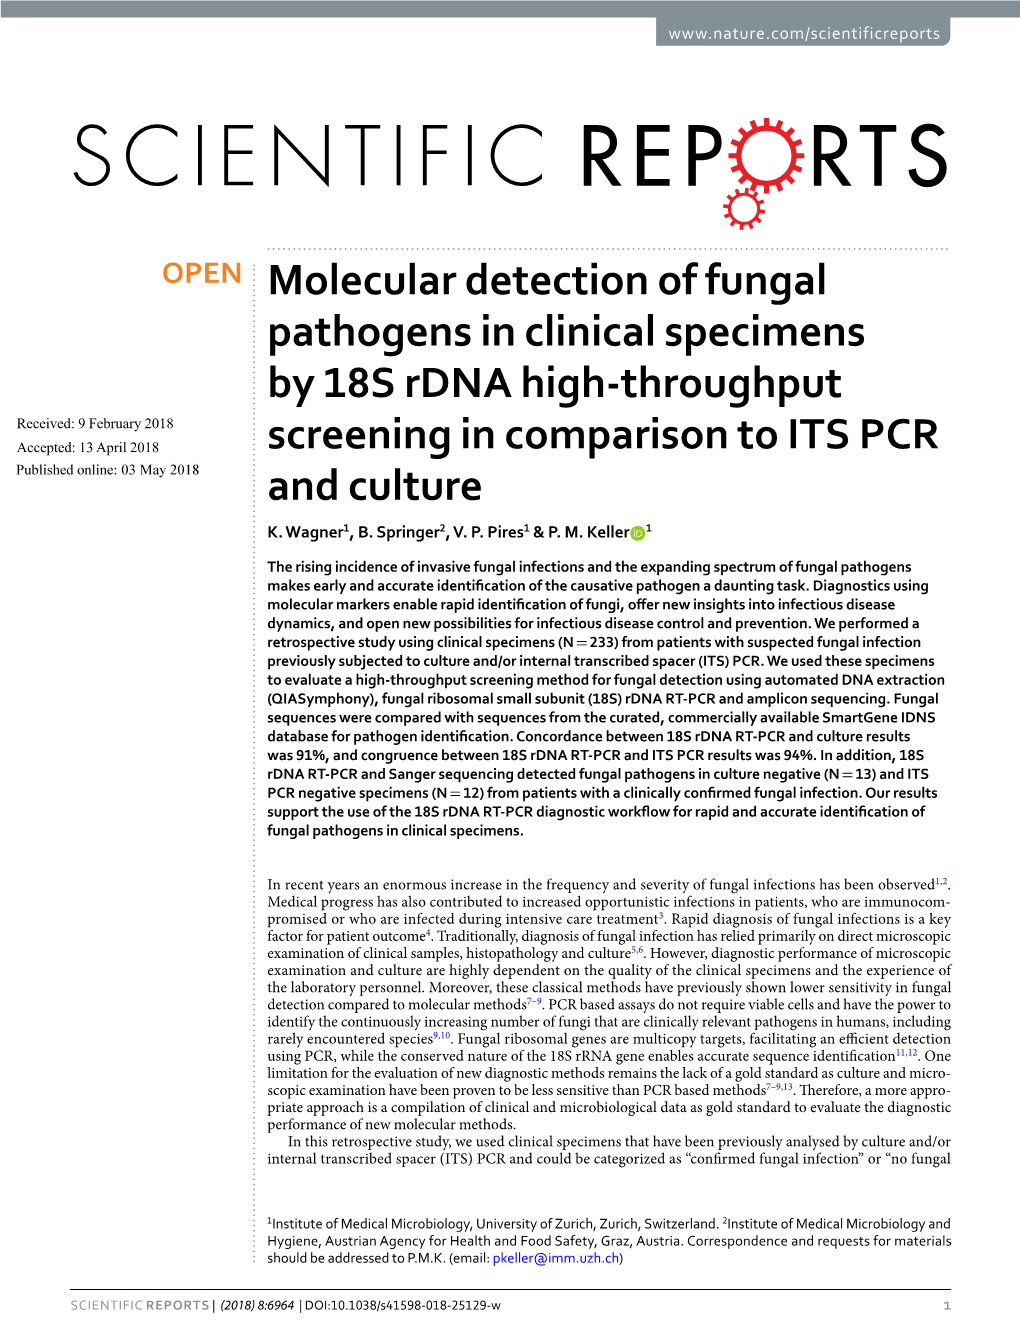 Molecular Detection of Fungal Pathogens in Clinical Specimens By